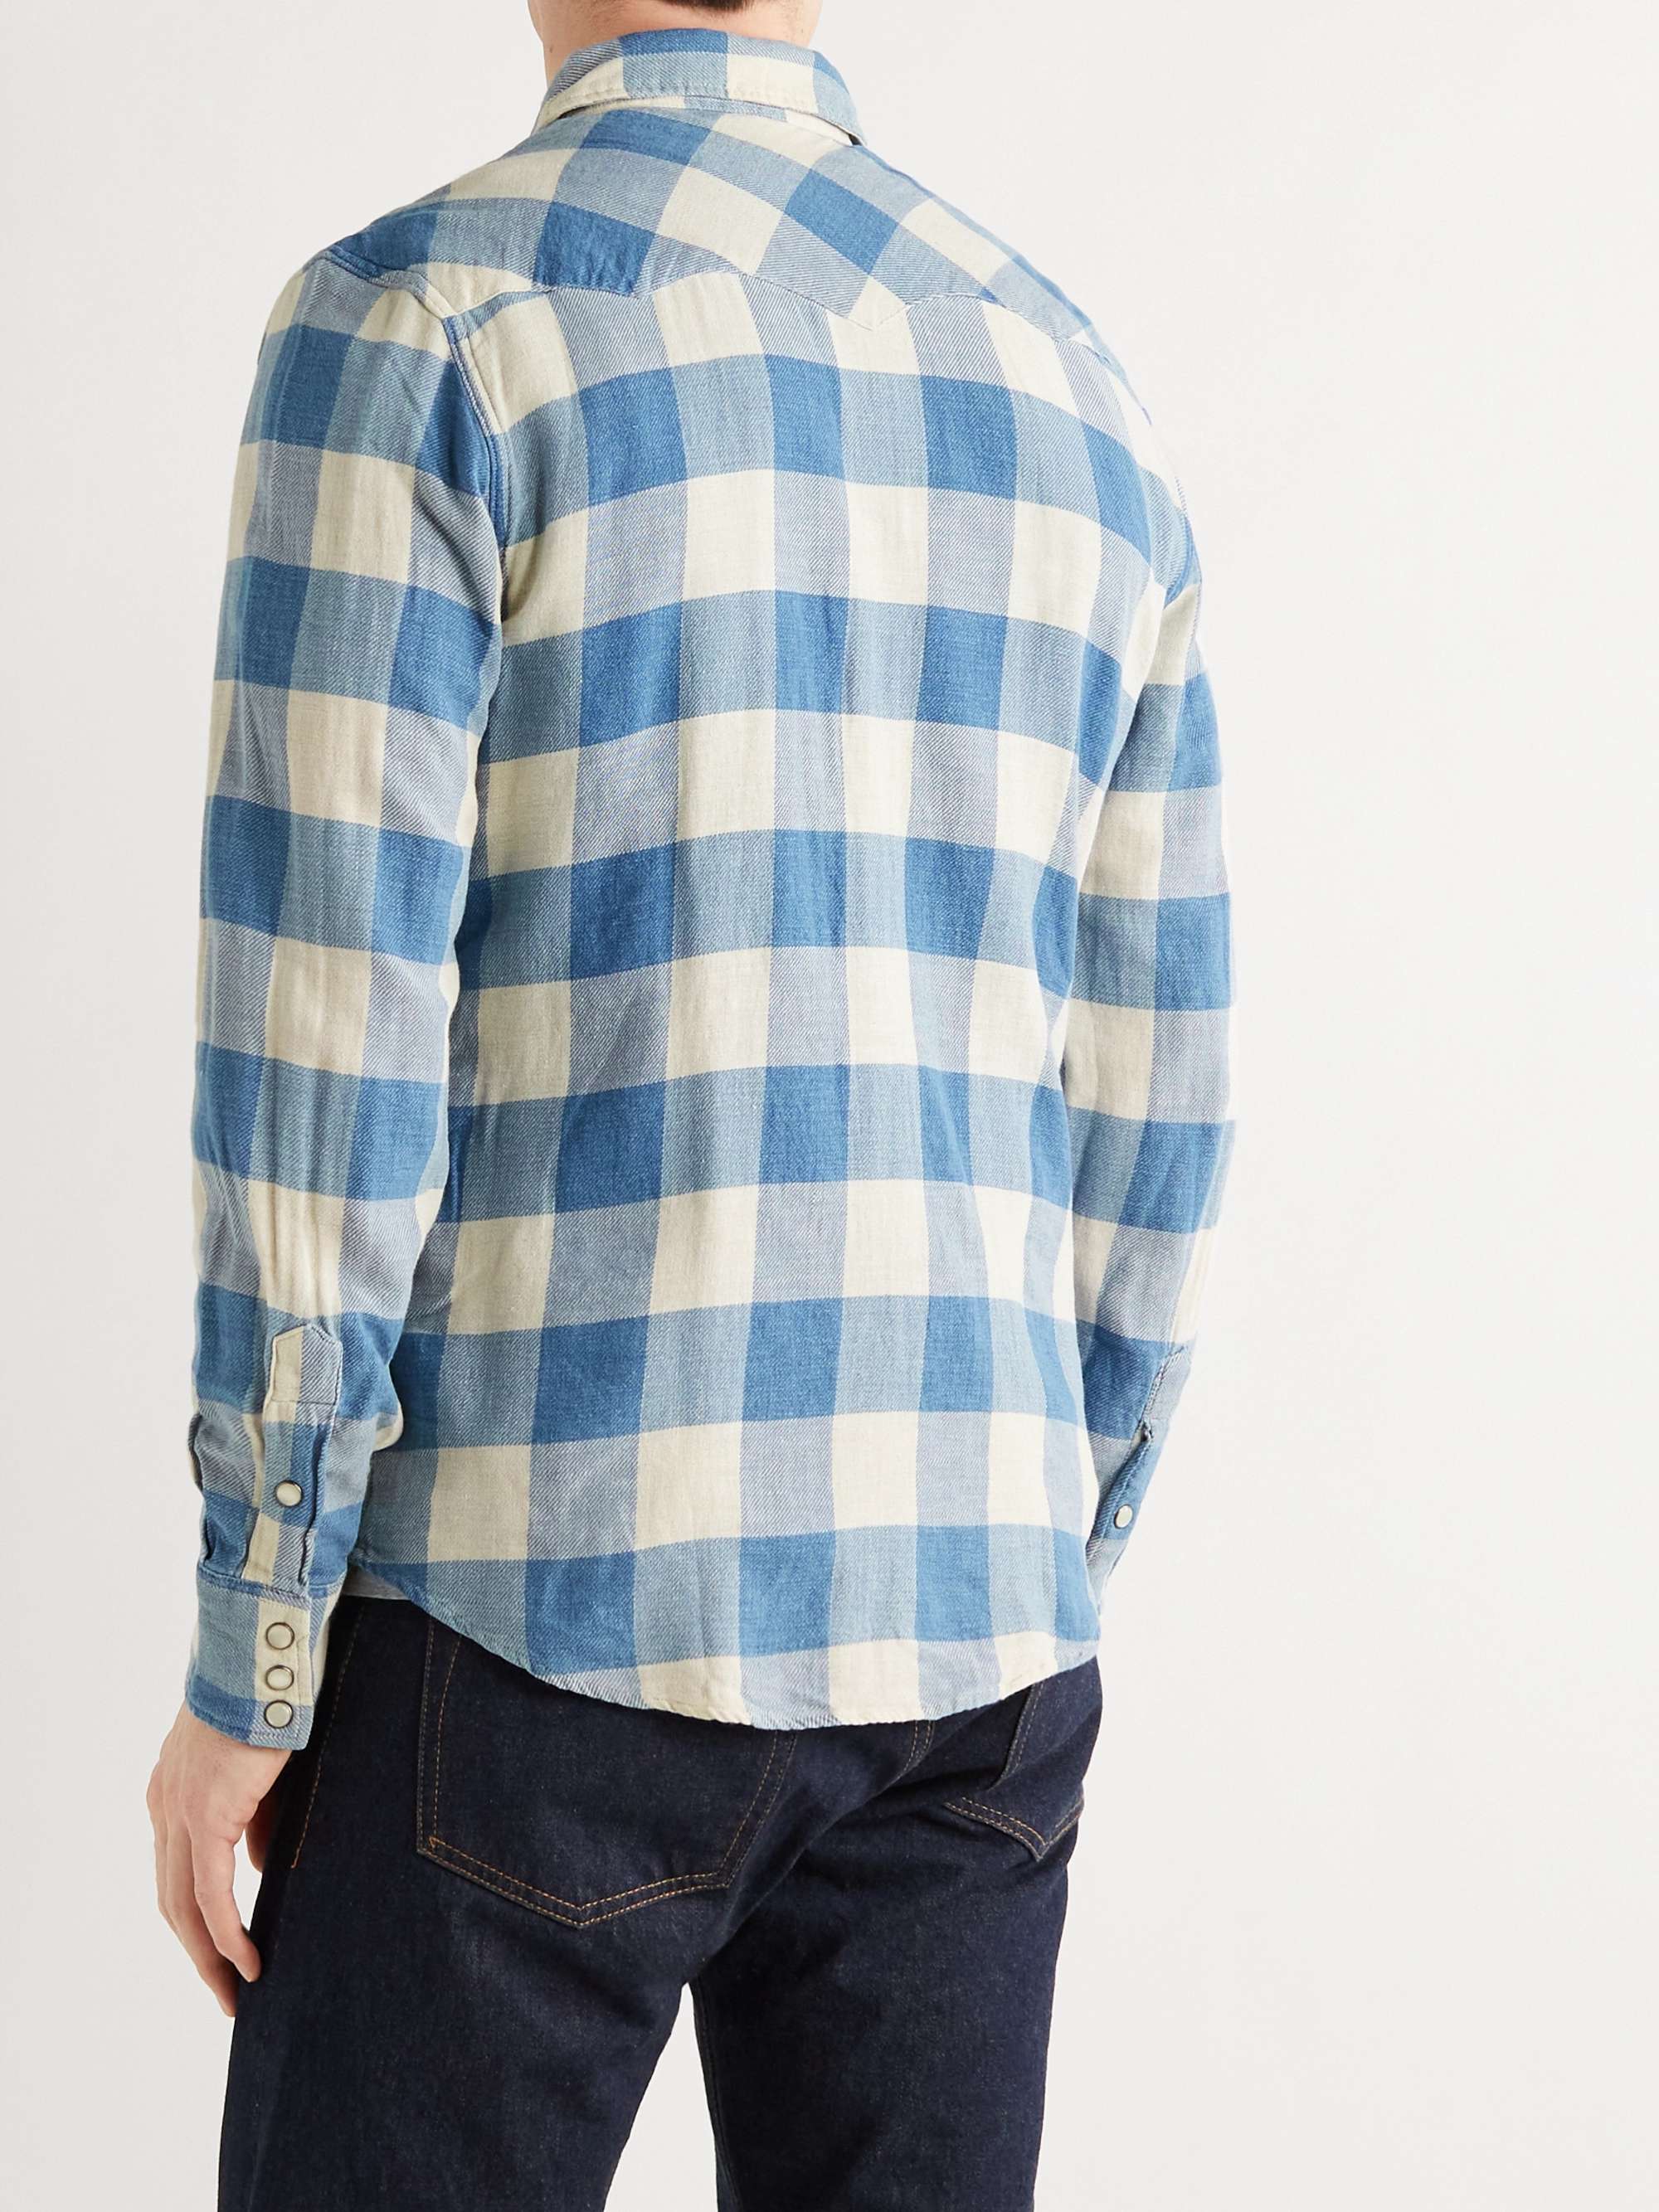 Buffalo-Checked Cotton and Linen-Blend Flannel Shirt